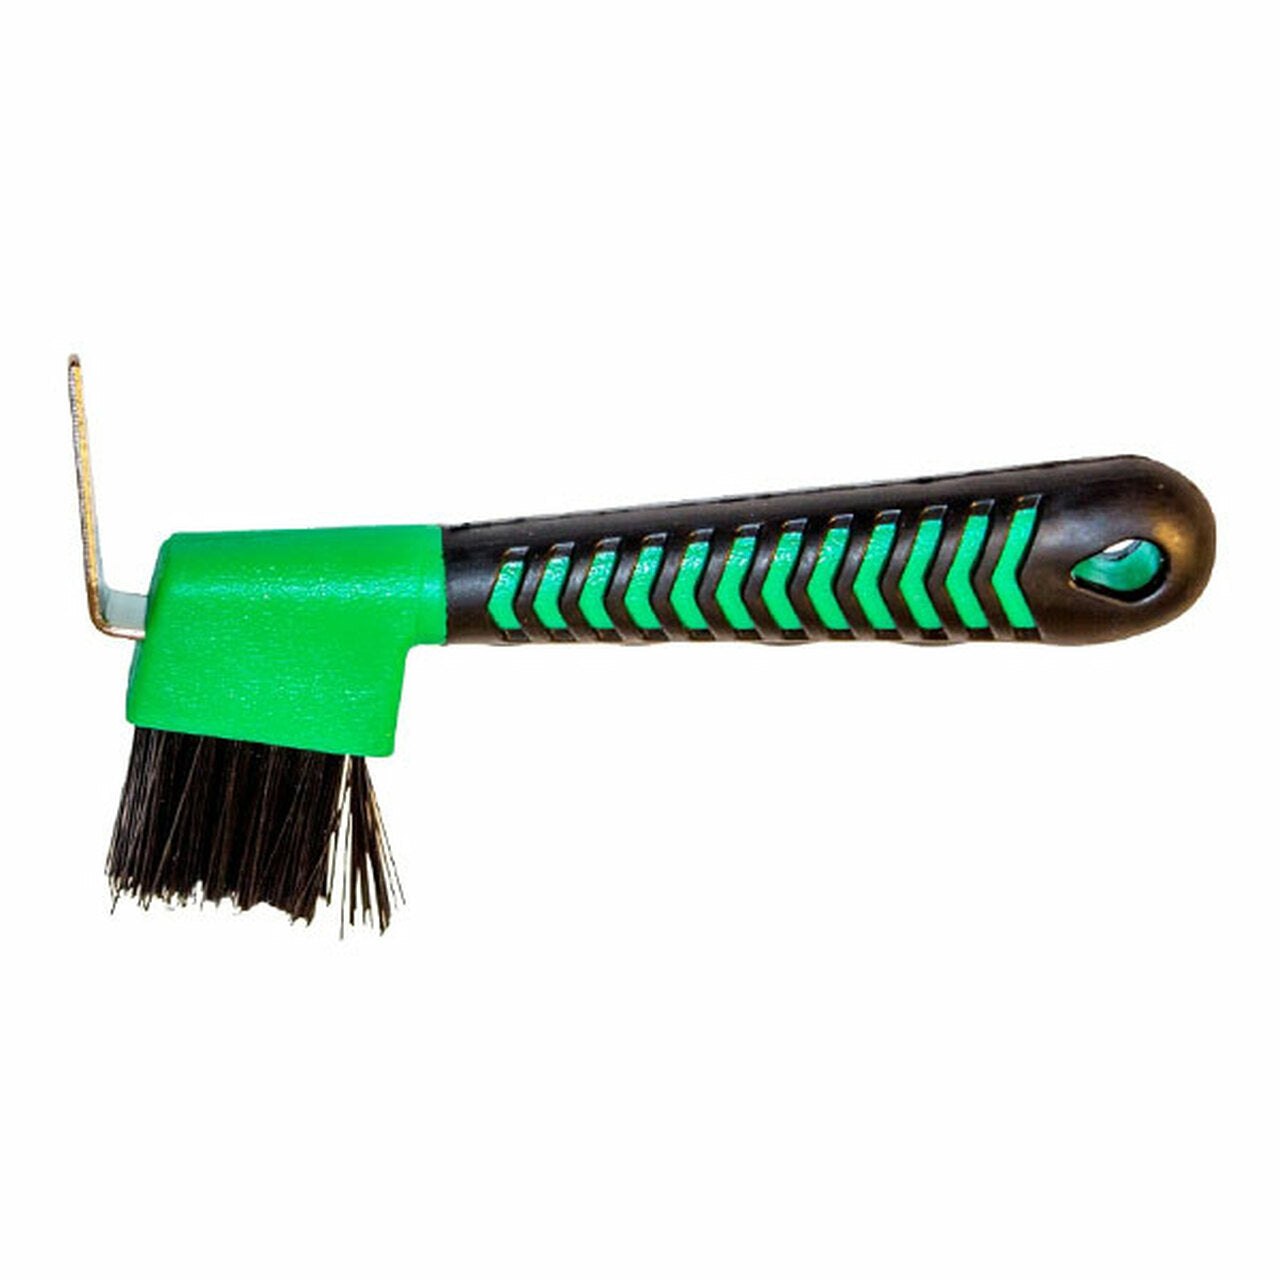 Side view of purple hoof pick with black shaped handle and bristles.